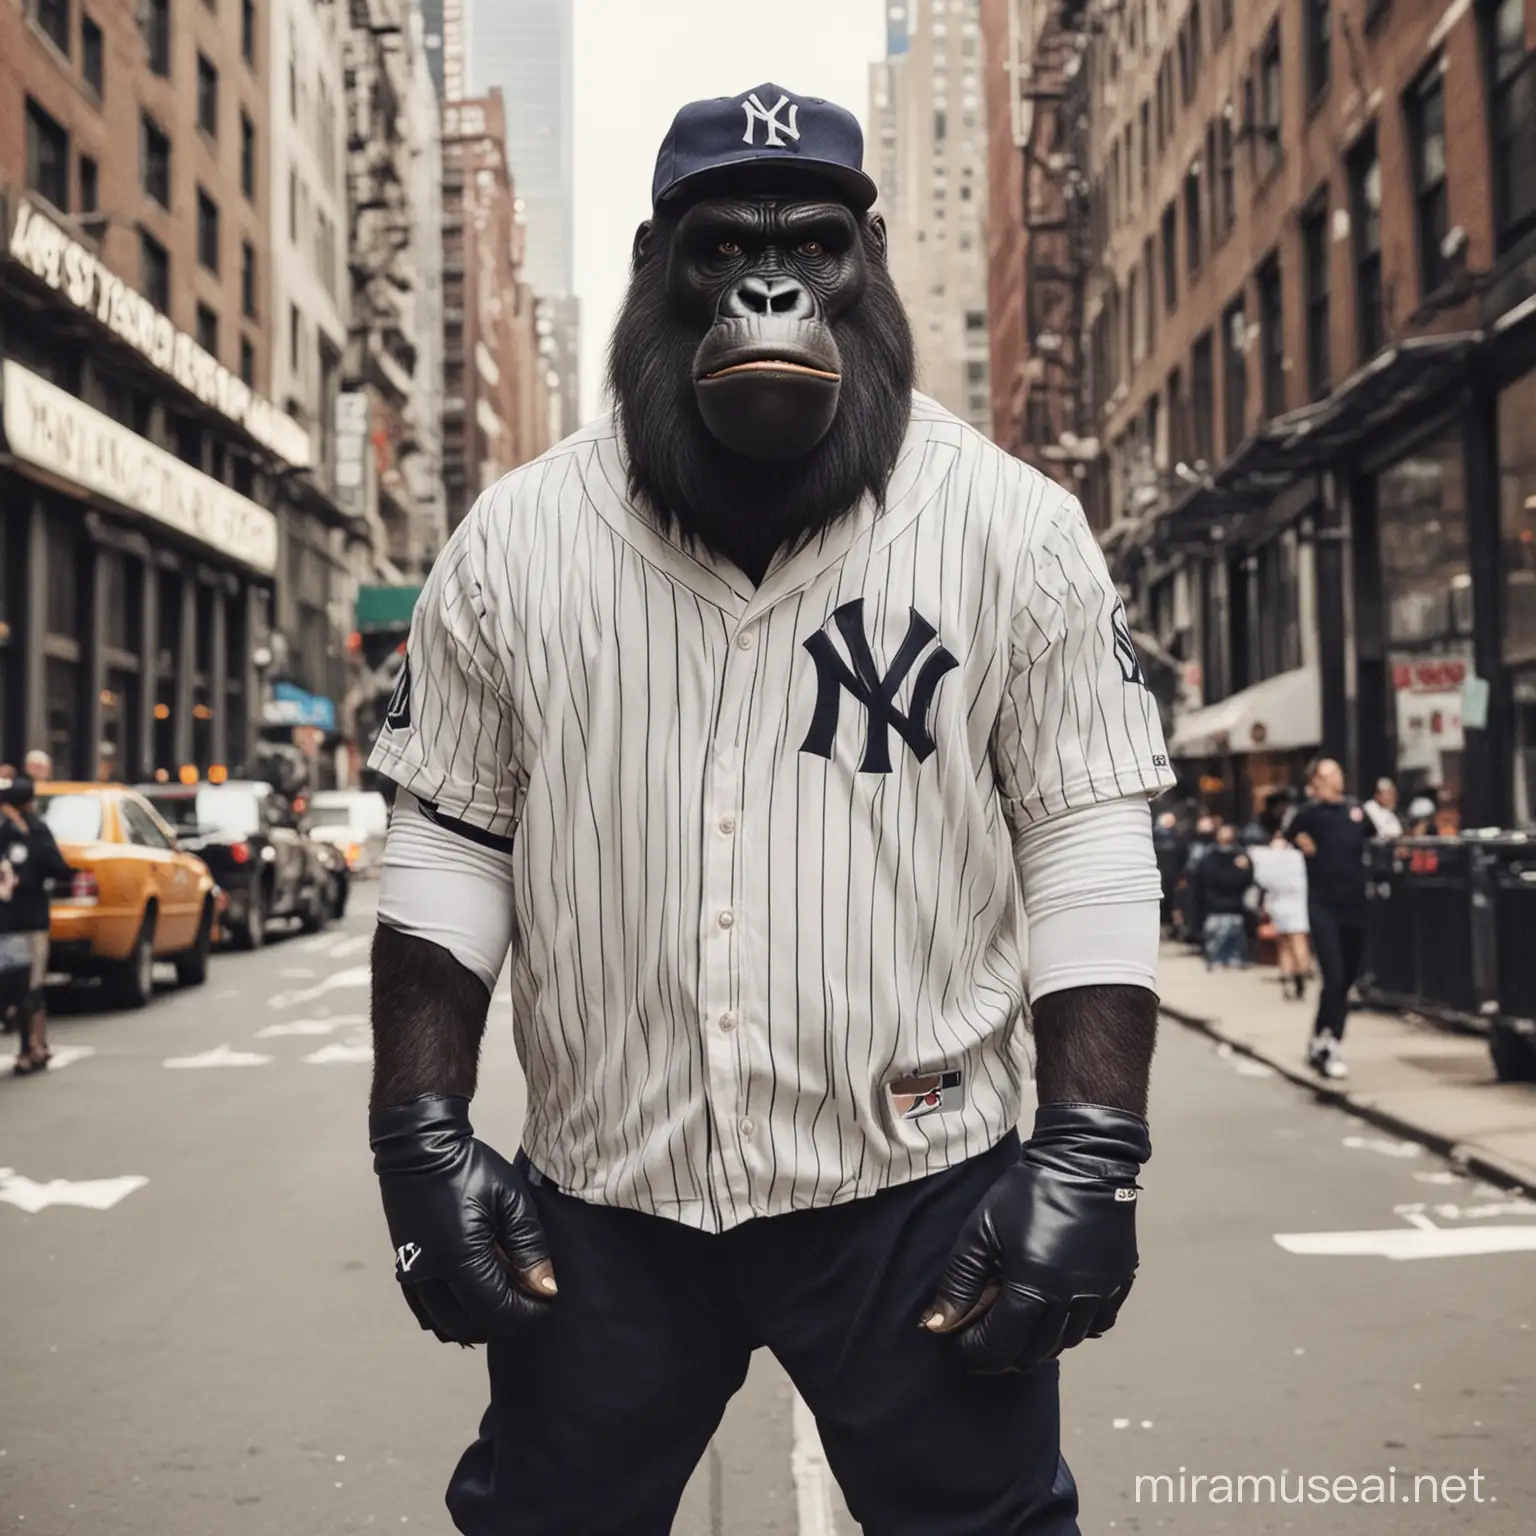 King Kong dressed in a New York Yankees baseball uniform, he is in New York City 